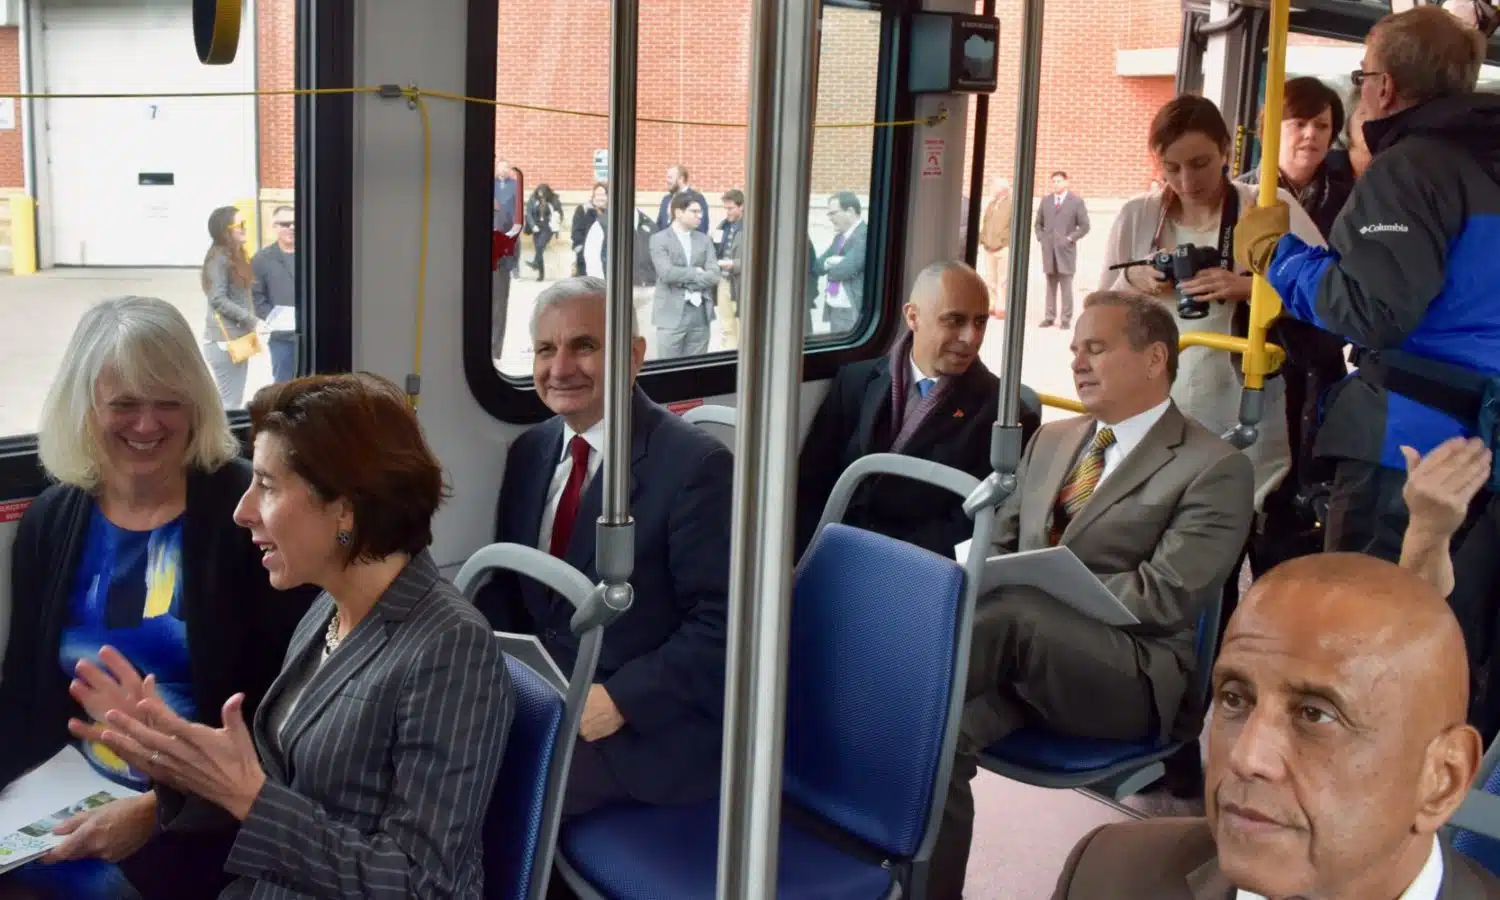 With climate change looming, why is Rhode Island making public transportation less convenient?